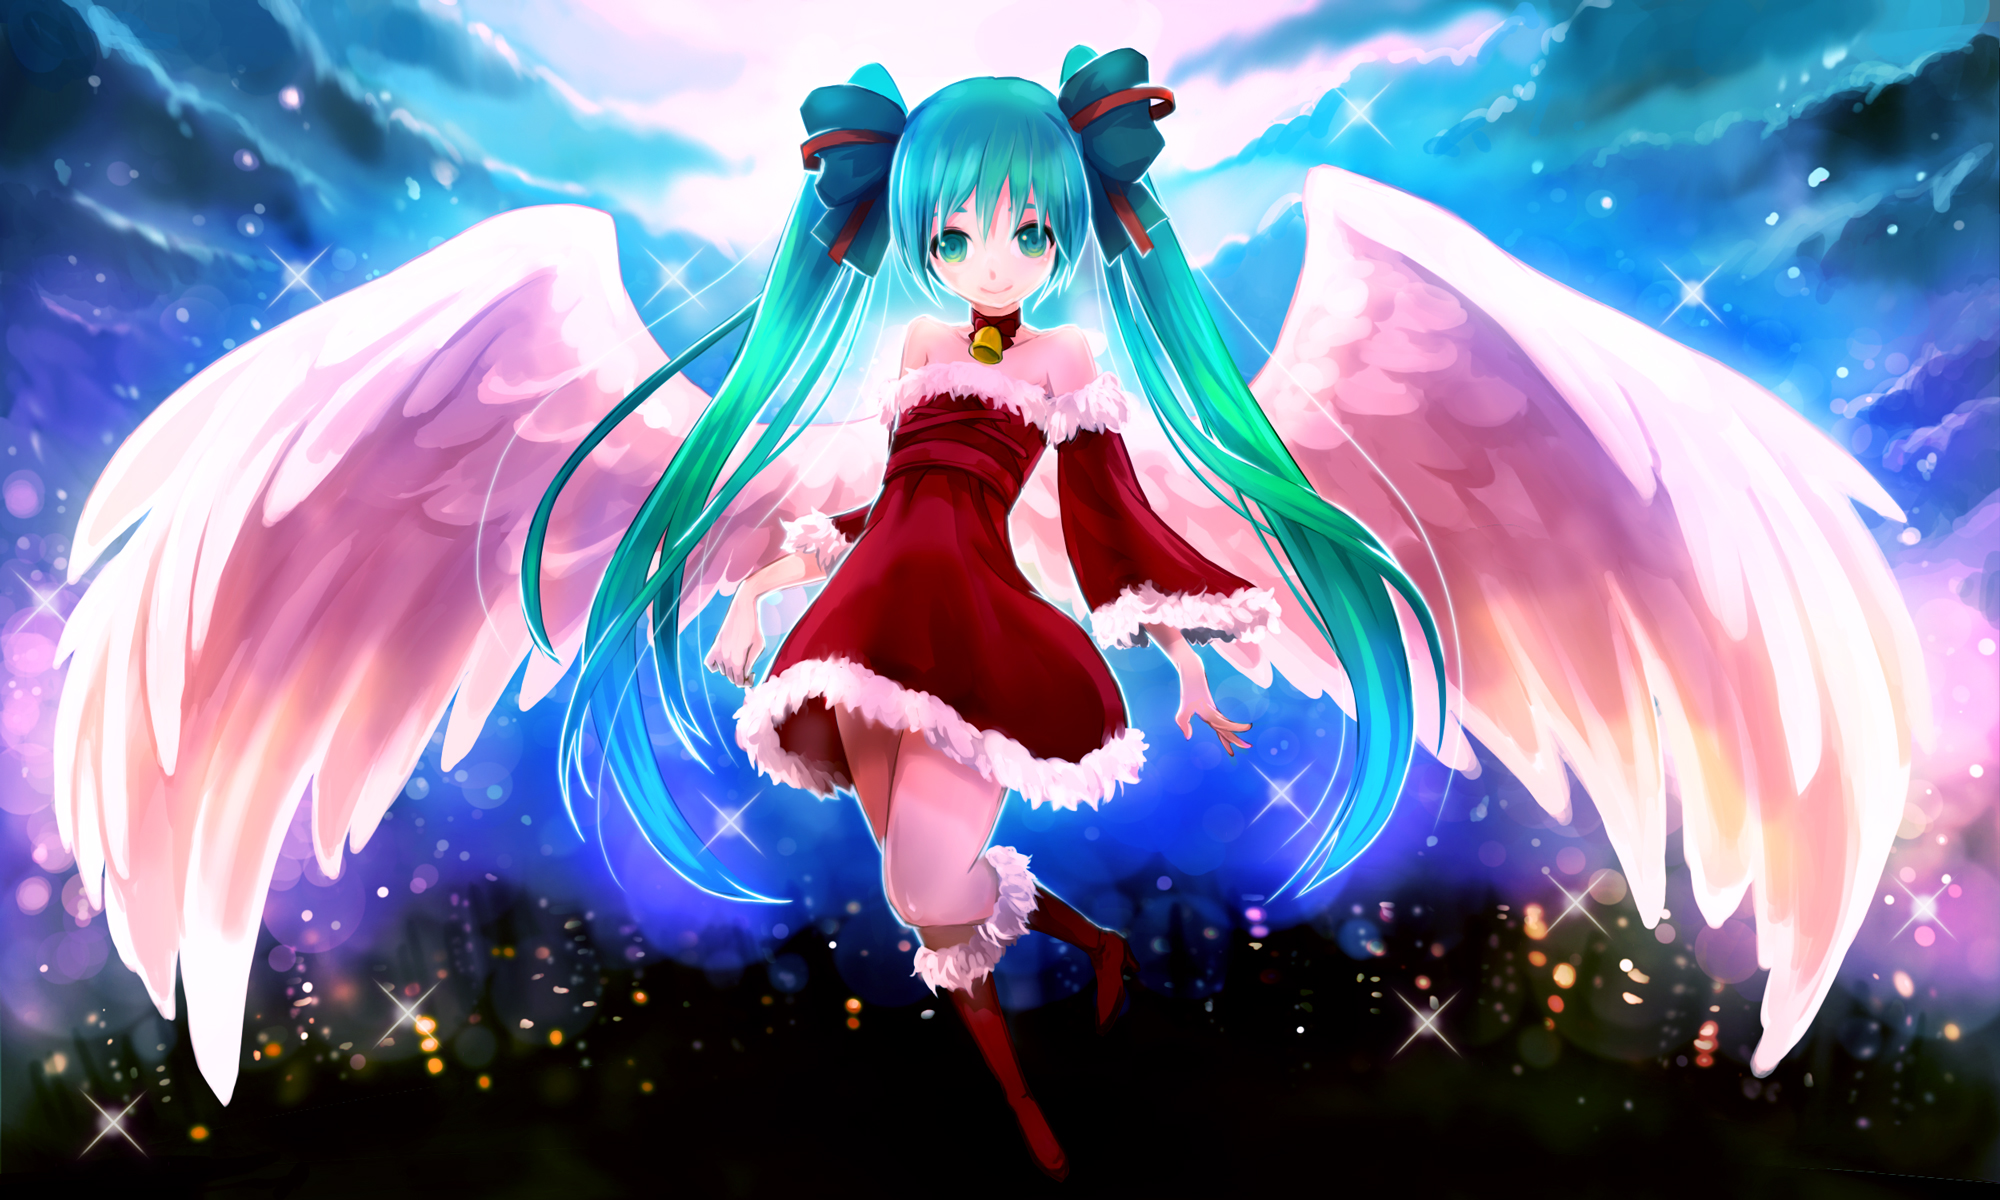 painting, Still, Life, Alexei, Antonov, Flowers, Lilies, Books, Glass, Wine, Table, Tableclotharie9, Bow, Christmas, Clouds, Dress, Green, Eyes, Hatsune, Miku, Long, Hair, Moon, Night, Twintails, Vocaloid, Wings Wallpaper